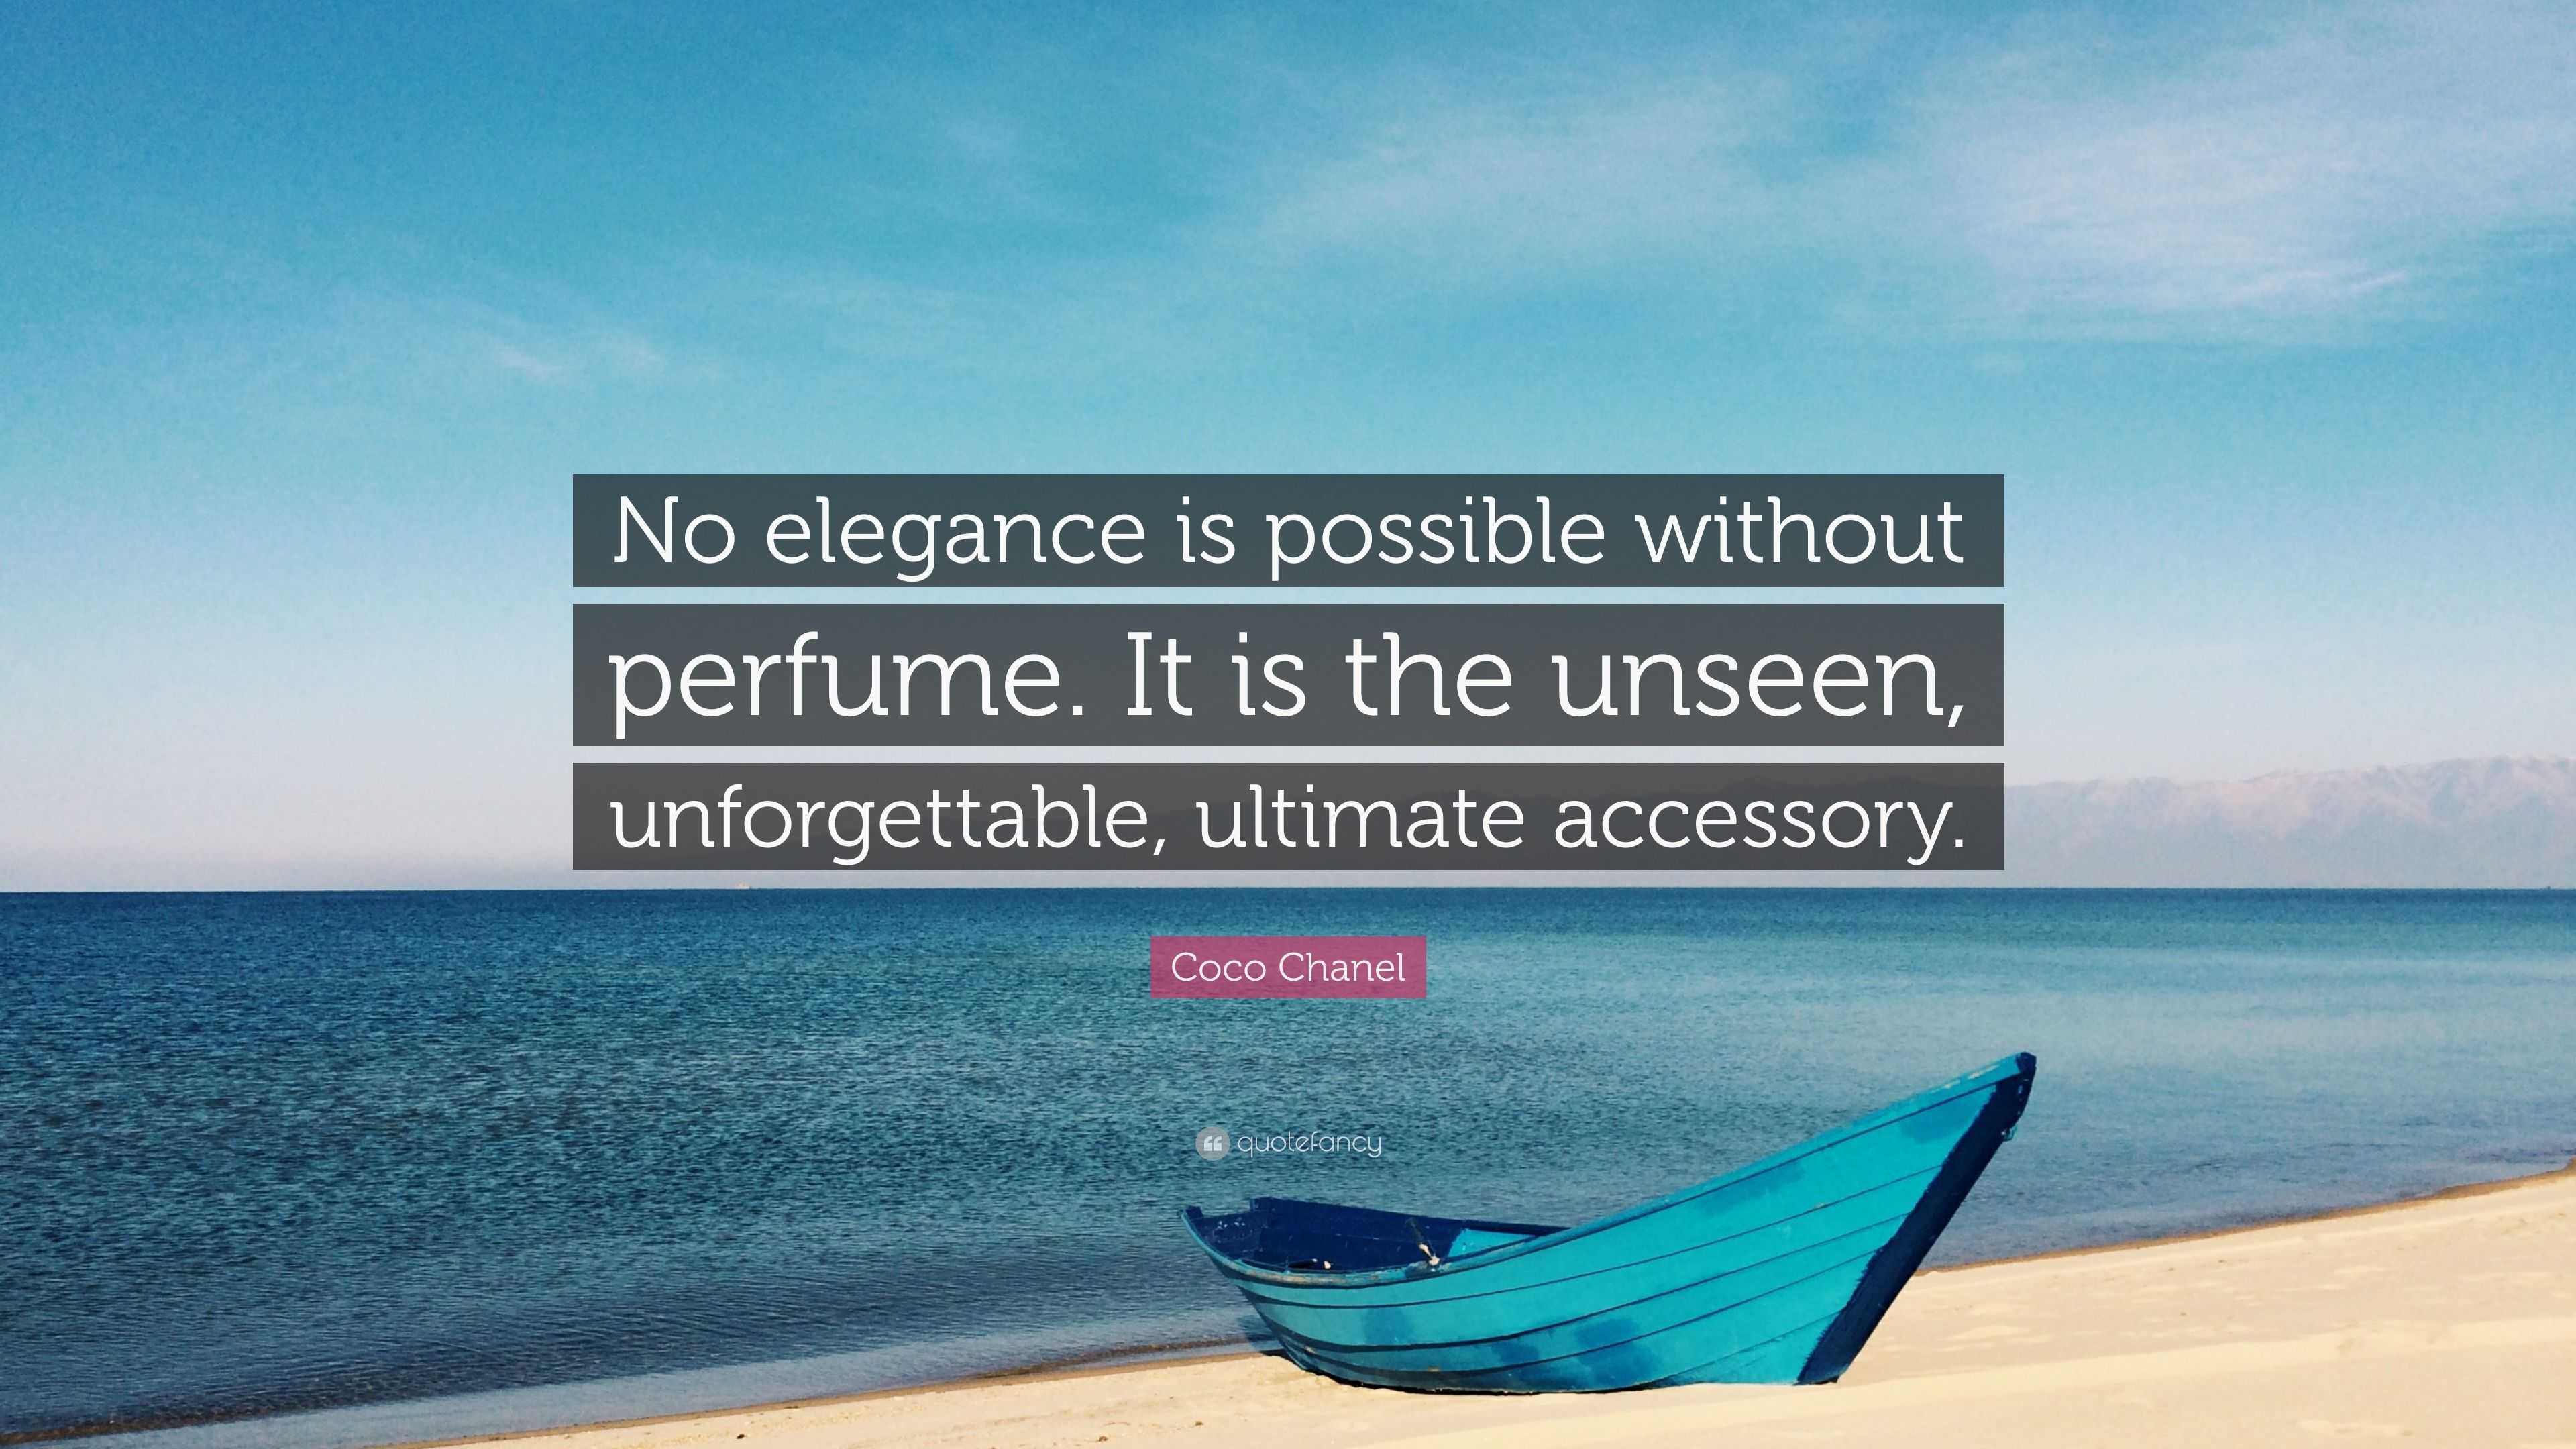 Coco Chanel Quote: “No elegance is possible without perfume. It is the  unseen, unforgettable, ultimate accessory.”